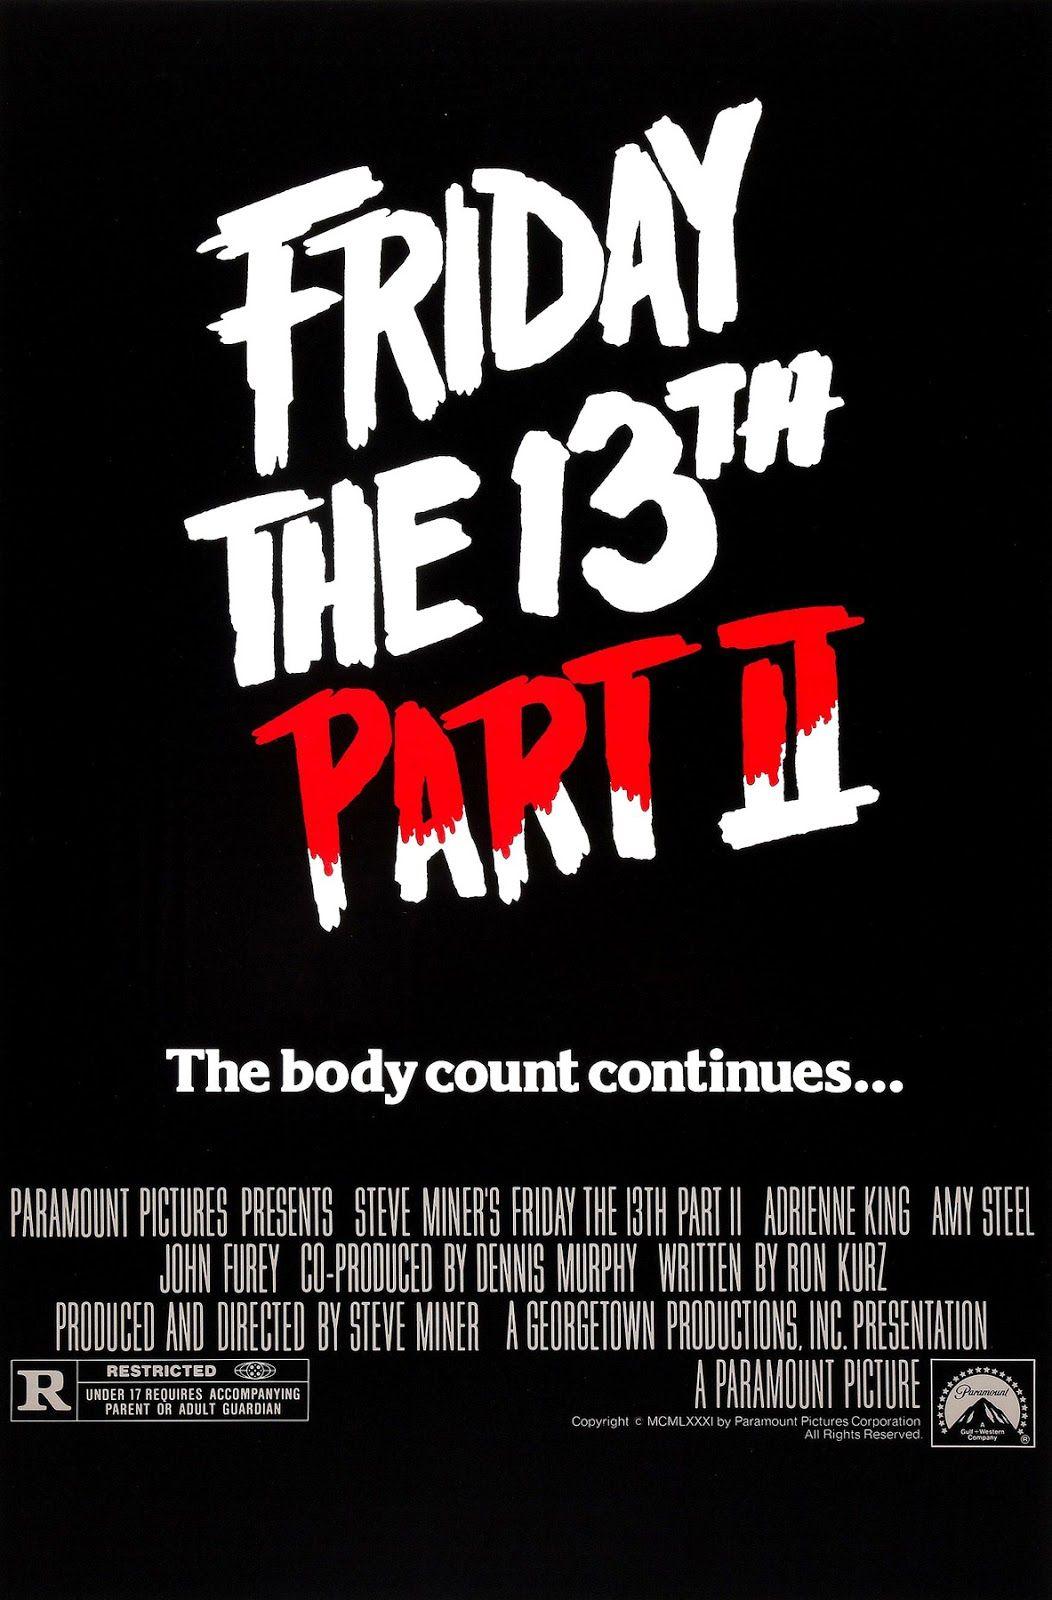 Friday the 13th Part 2 Logo - Reel to Real Movie and TV Locations: Friday the 13th Part 2 (1981)